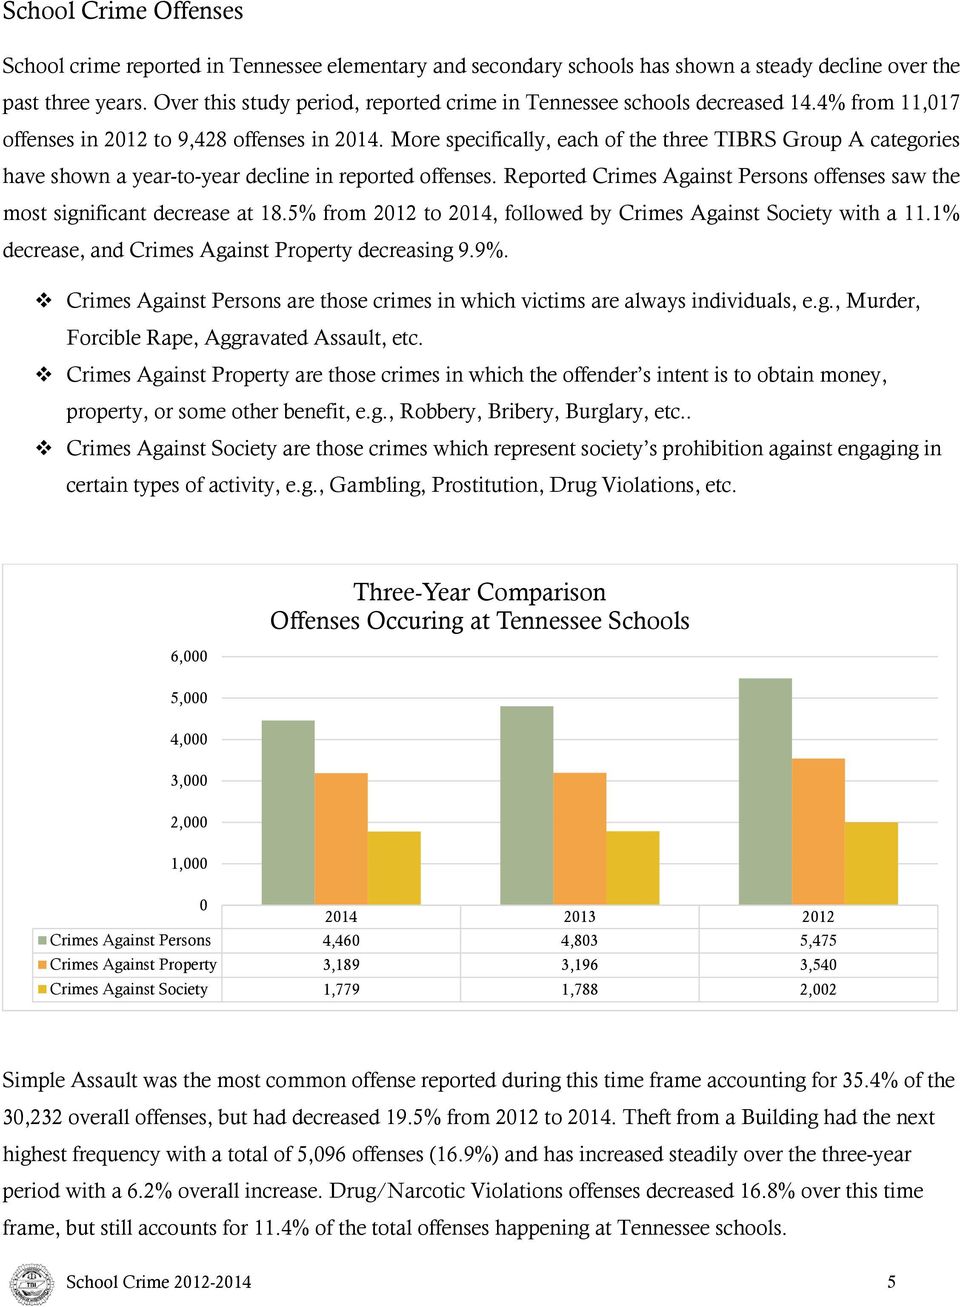 More specifically, each of the three TIBRS Group A categories have shown a year-to-year decline in reported offenses. Reported Crimes Against Persons offenses saw the most significant decrease at 18.